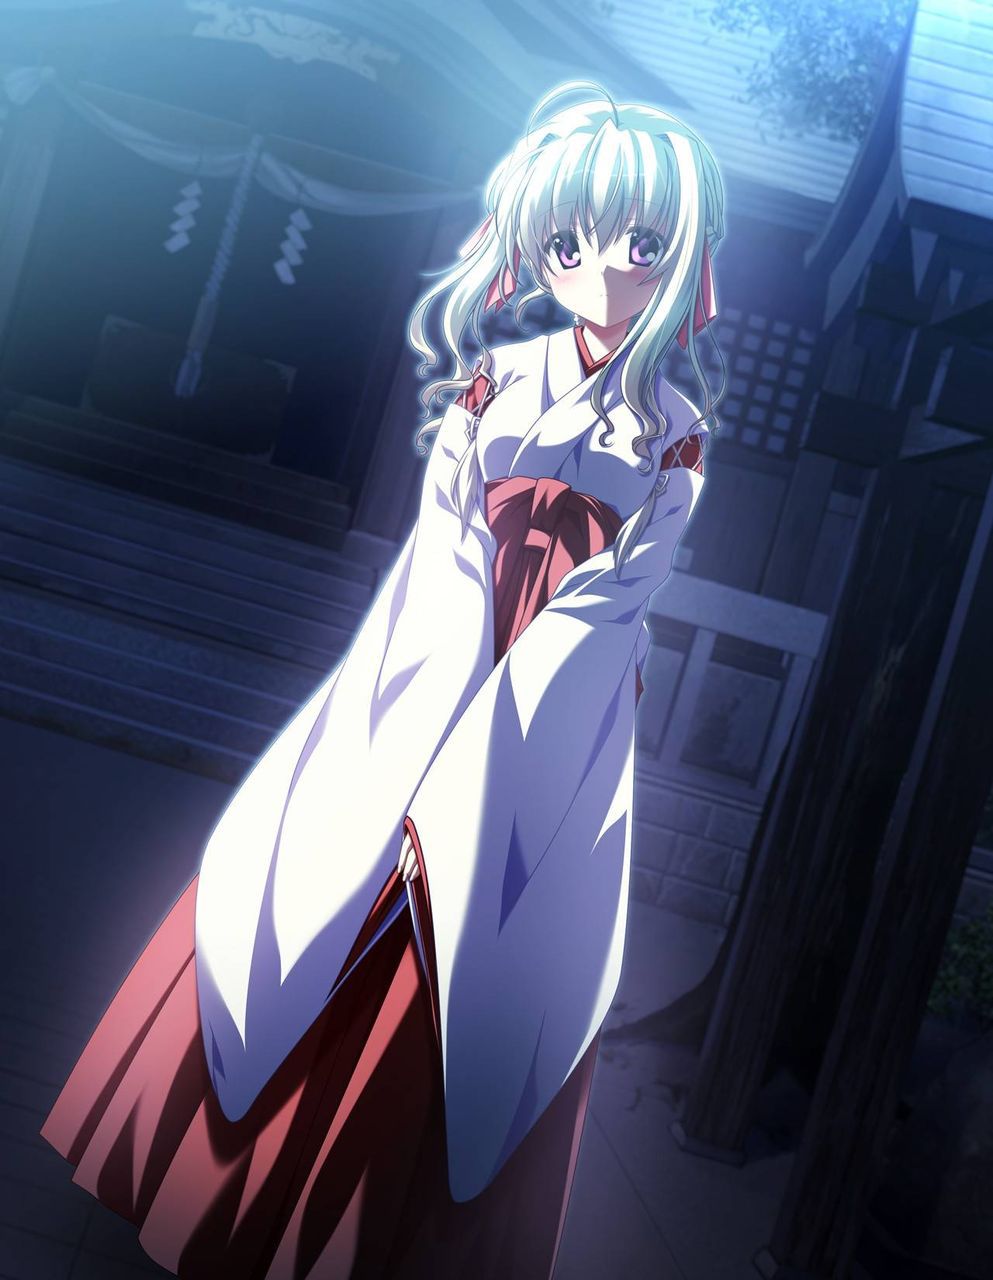 I will release the erotic image folder of the shrine maiden 8